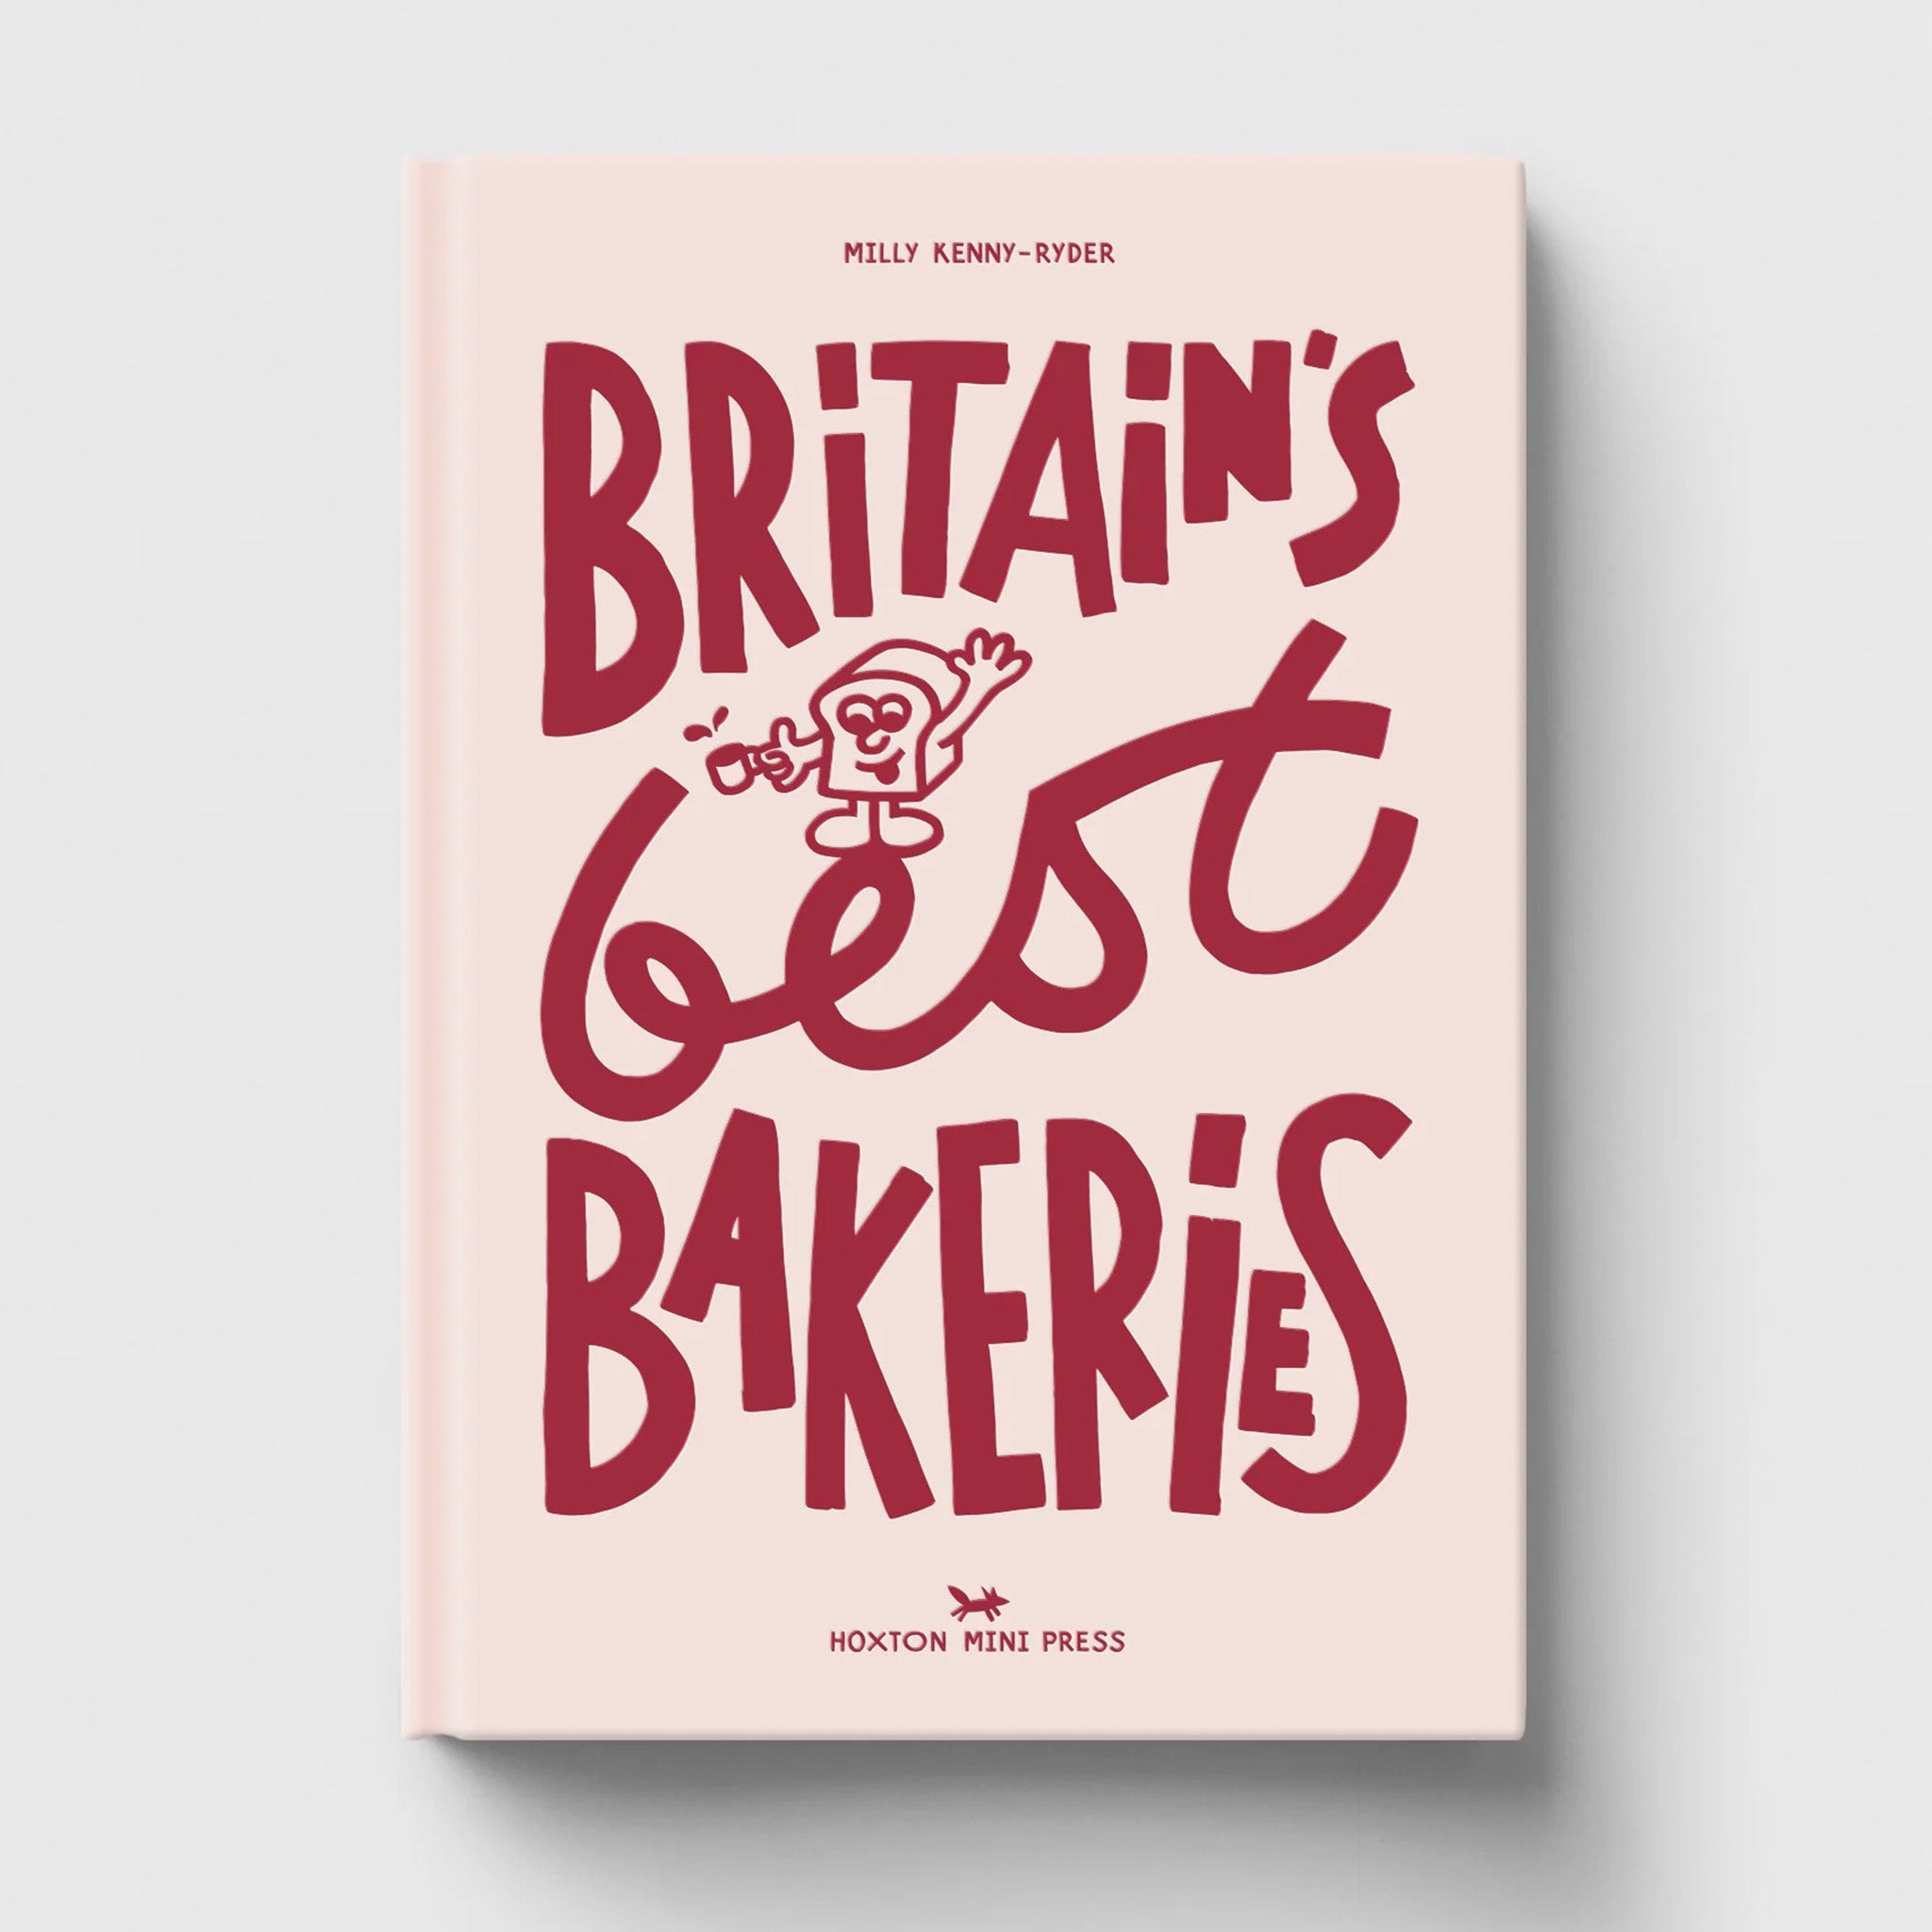 Britain's Best Bakeries by Milly Kenny-Ryder for Hoxton Mini Press